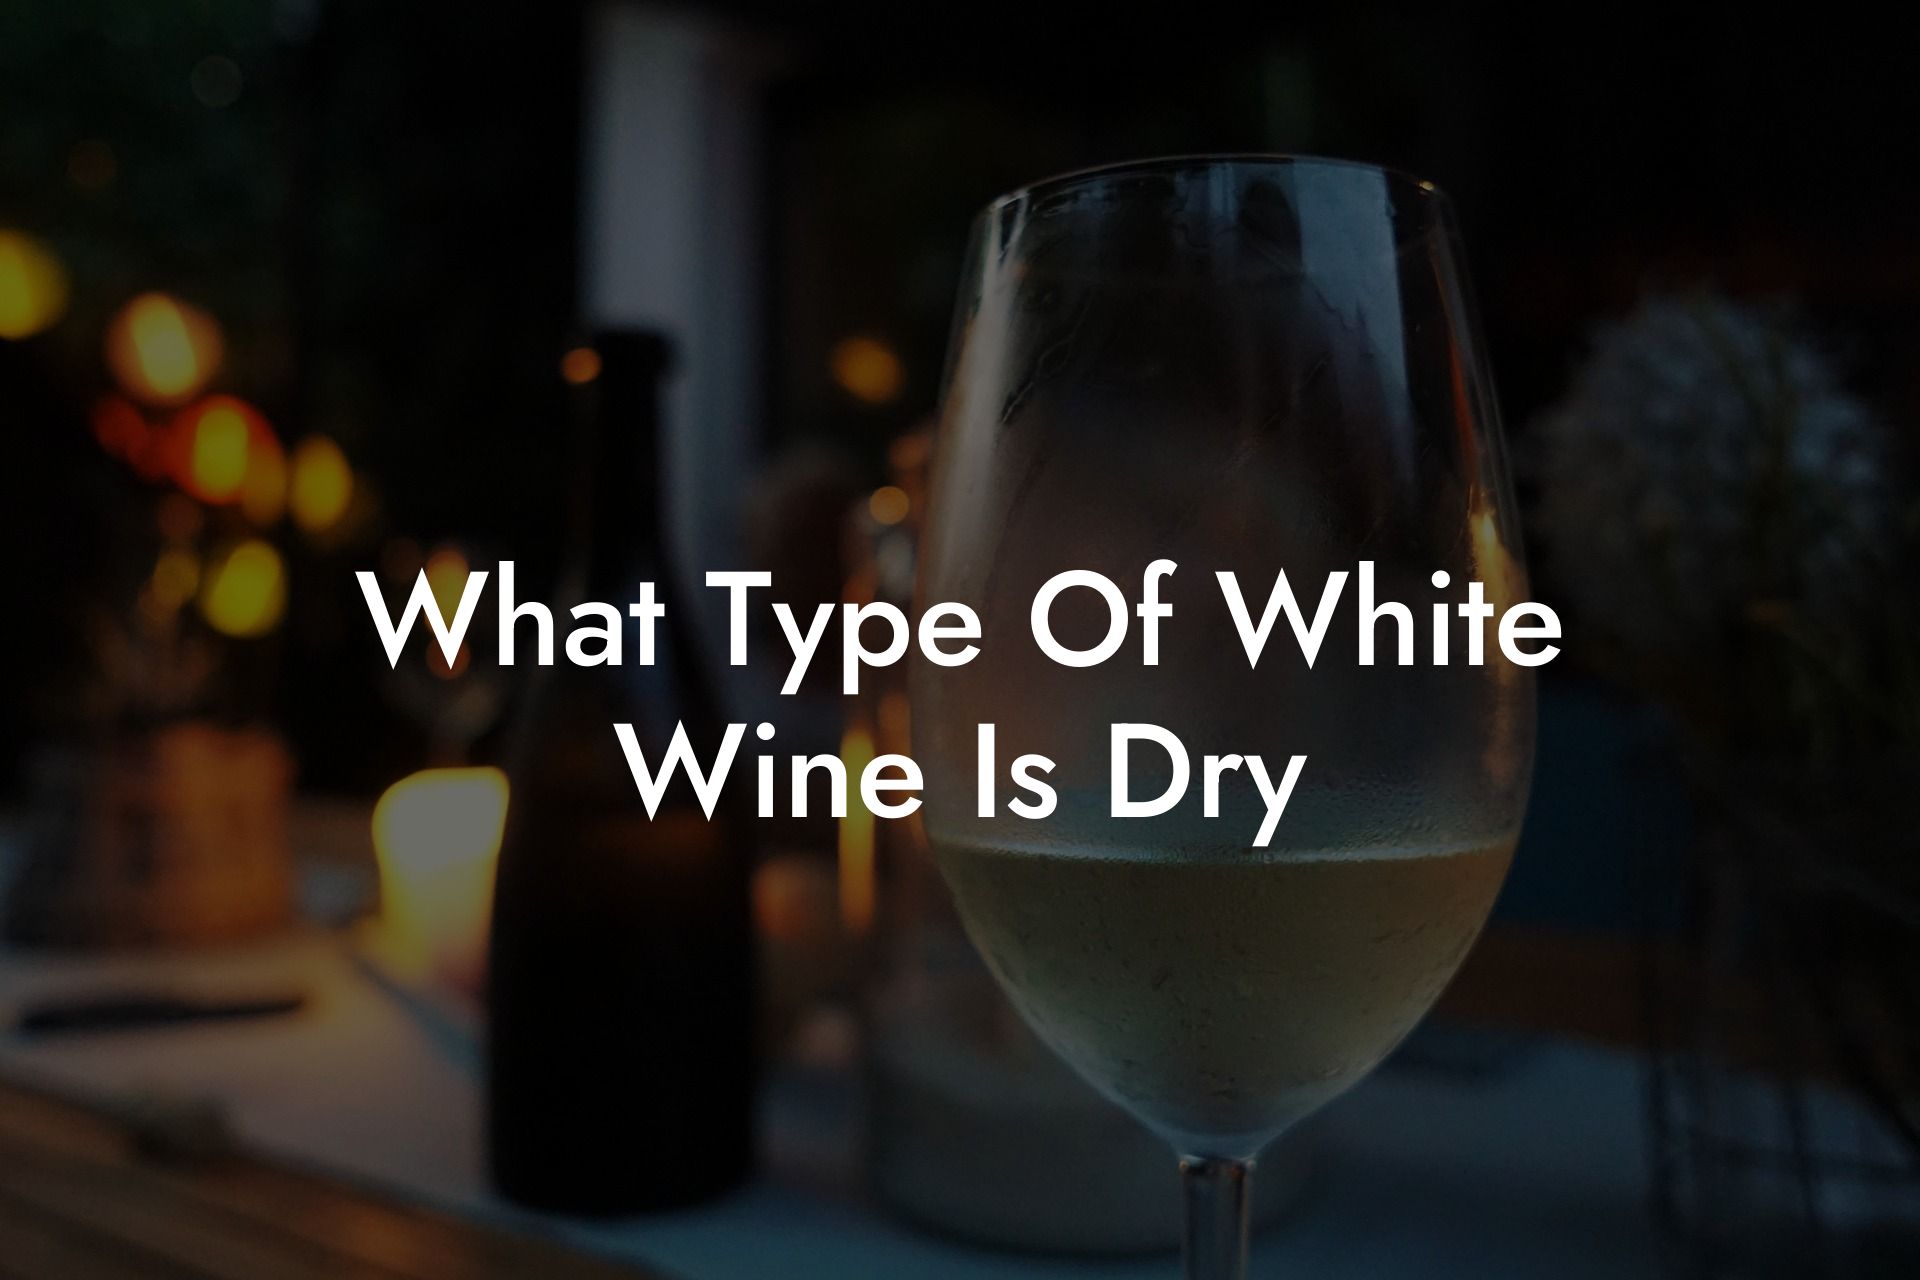 What Type Of White Wine Is Dry